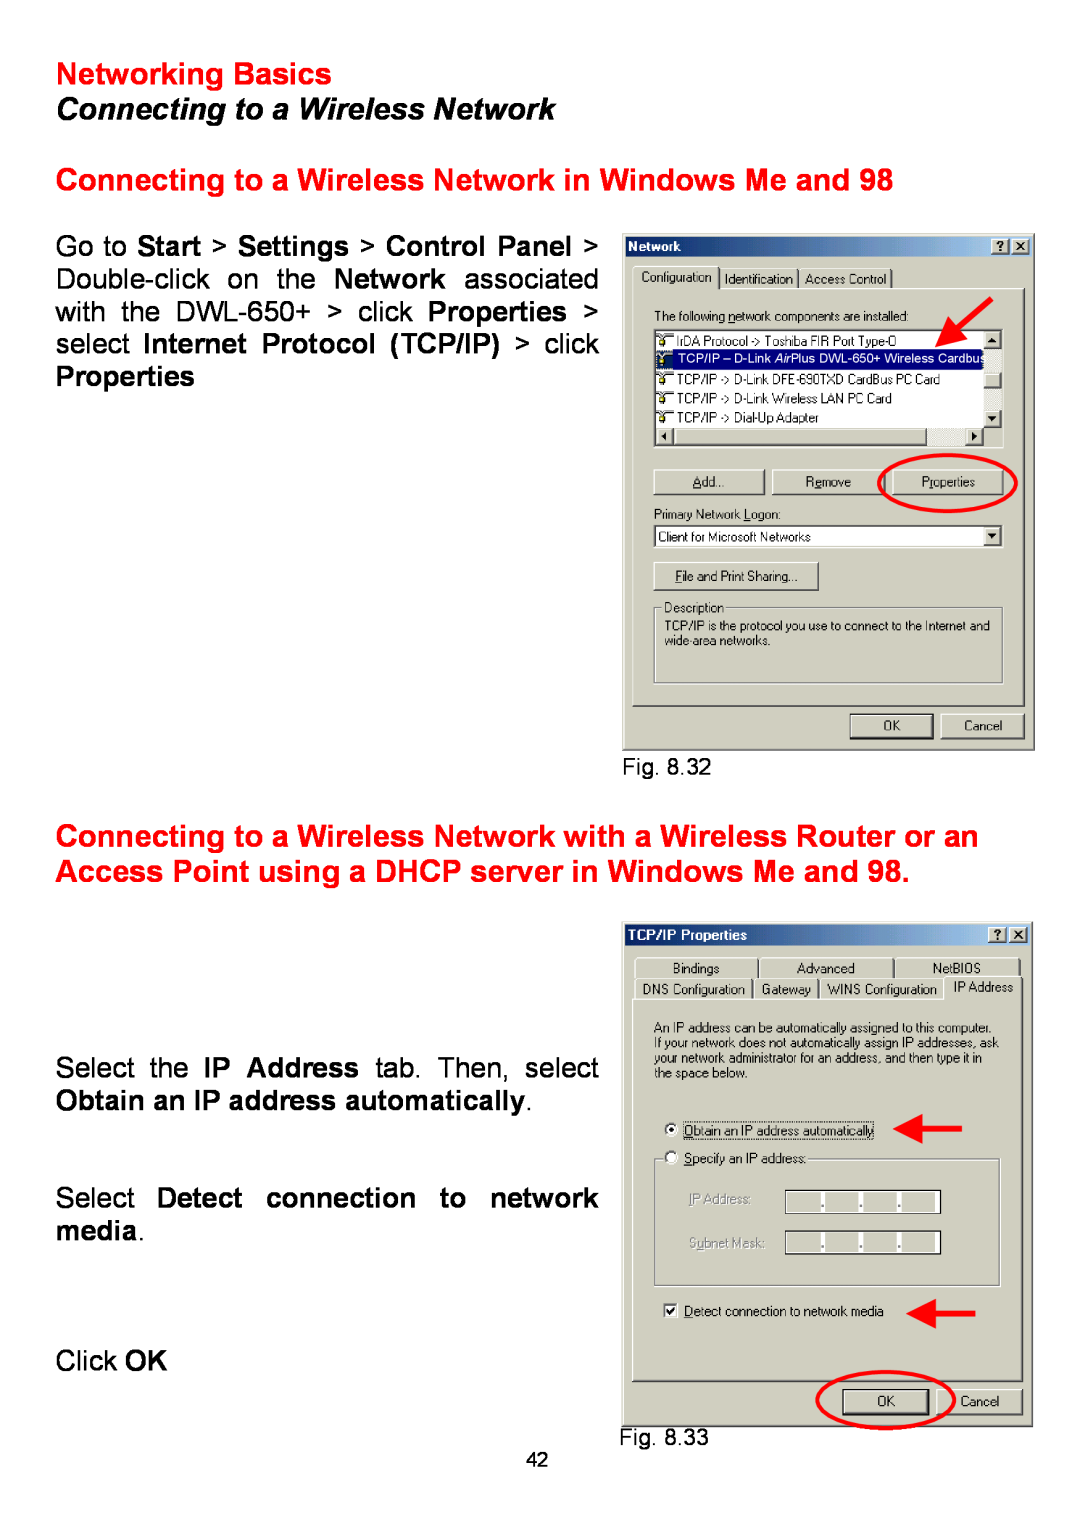 D-Link DWL-650+ Connecting to a Wireless Network in Windows Me and, Obtain an IP address automatically, Networking Basics 